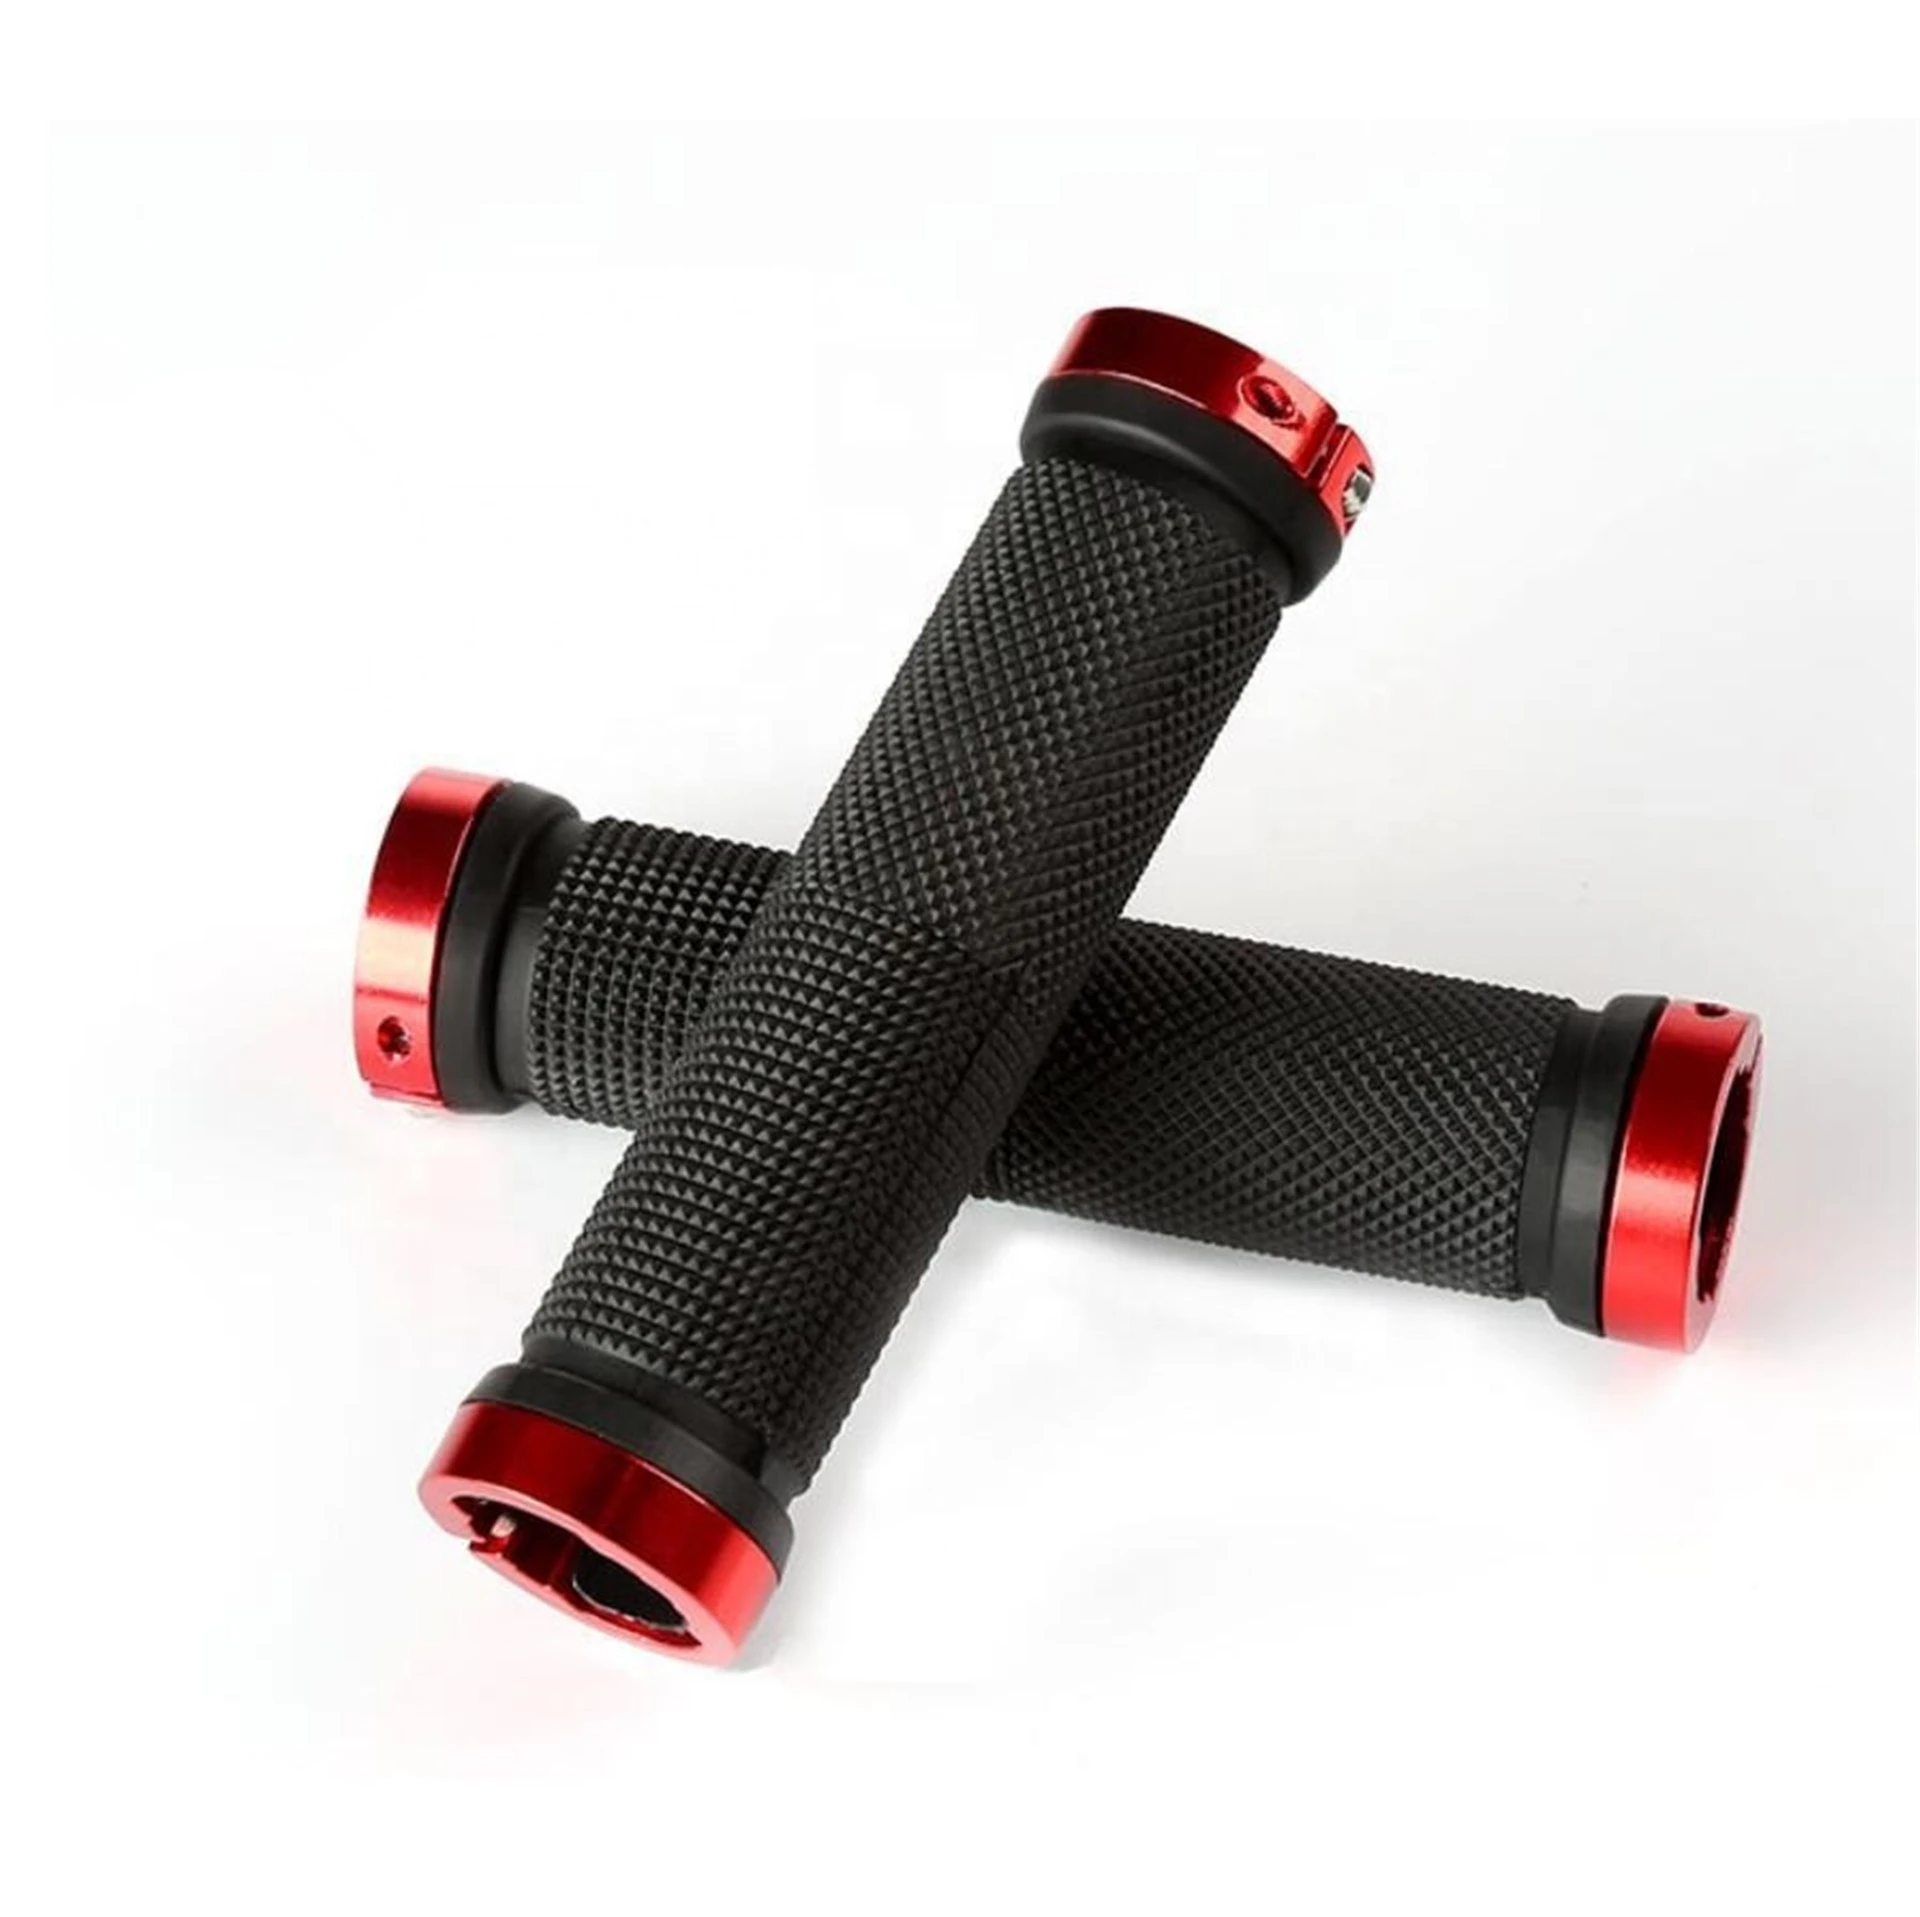 Aluminium Alloy Two Sides Can Be Locked Anti-slip Bicycle grips